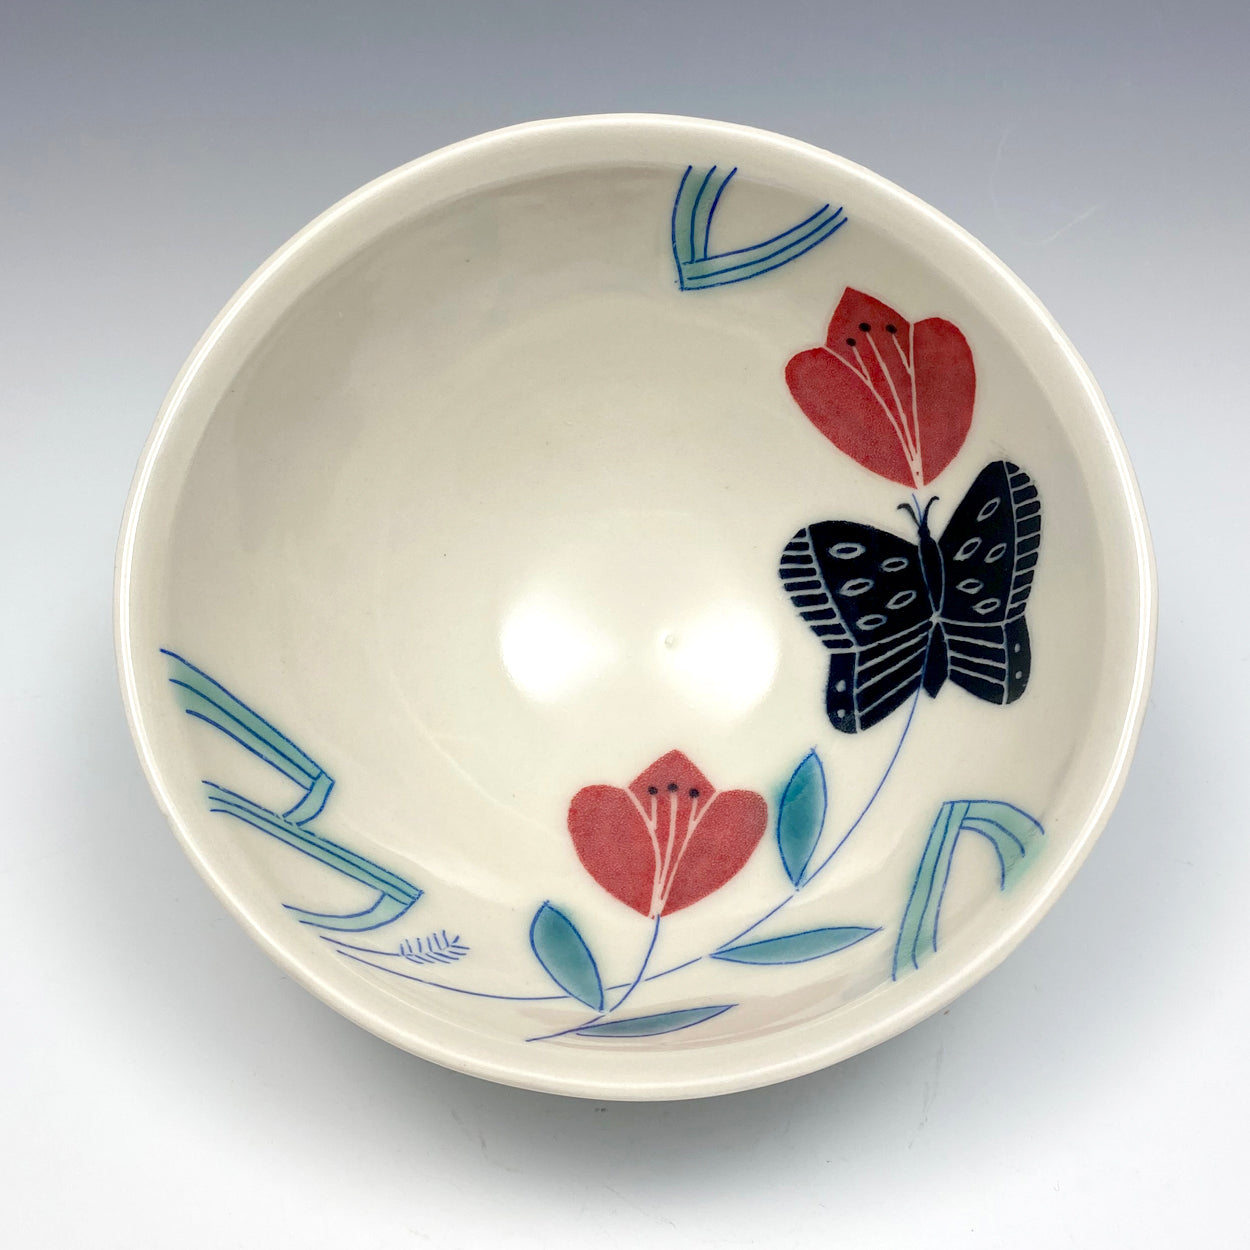 Cereal bowl with black butterfly 01 – Asta Joana Design